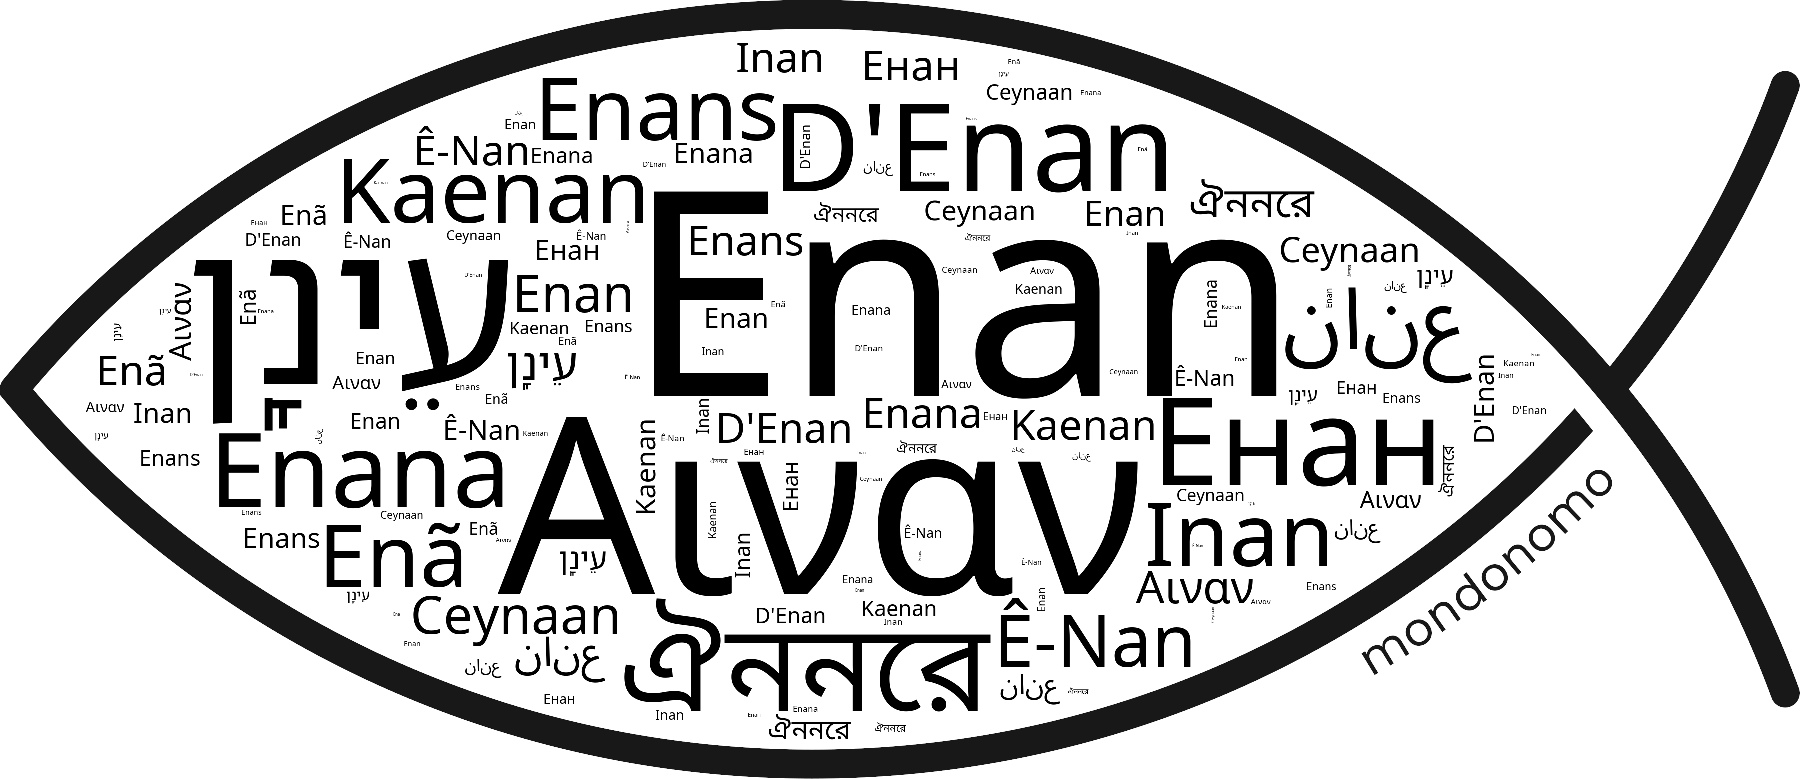 Name Enan in the world's Bibles